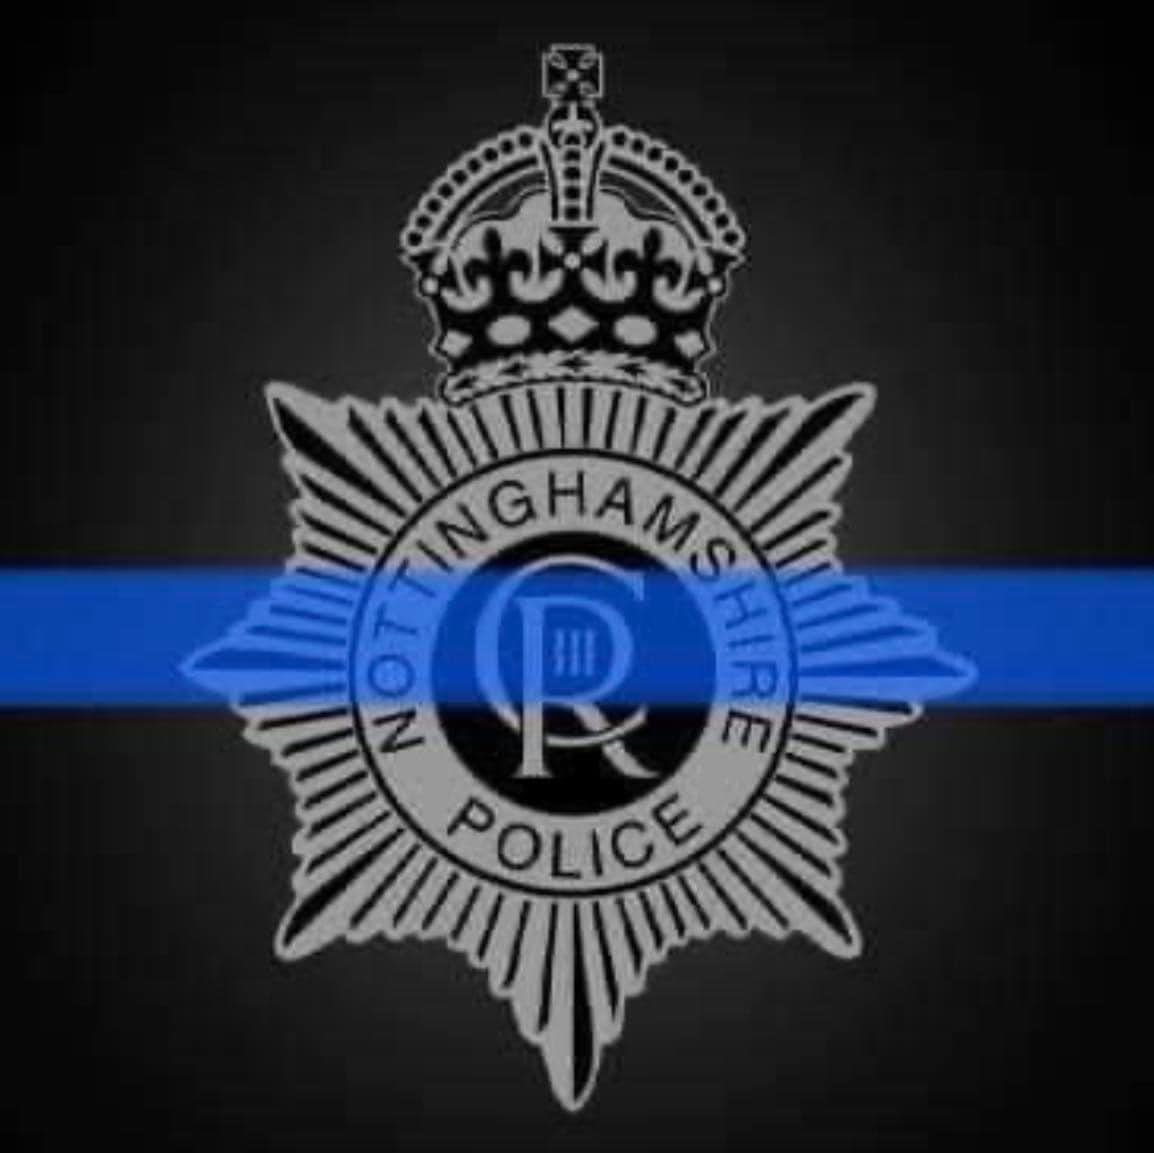 #RIP Graham. 
A officer who put others before himself .
may he rest in peace #999family 
💙 💔